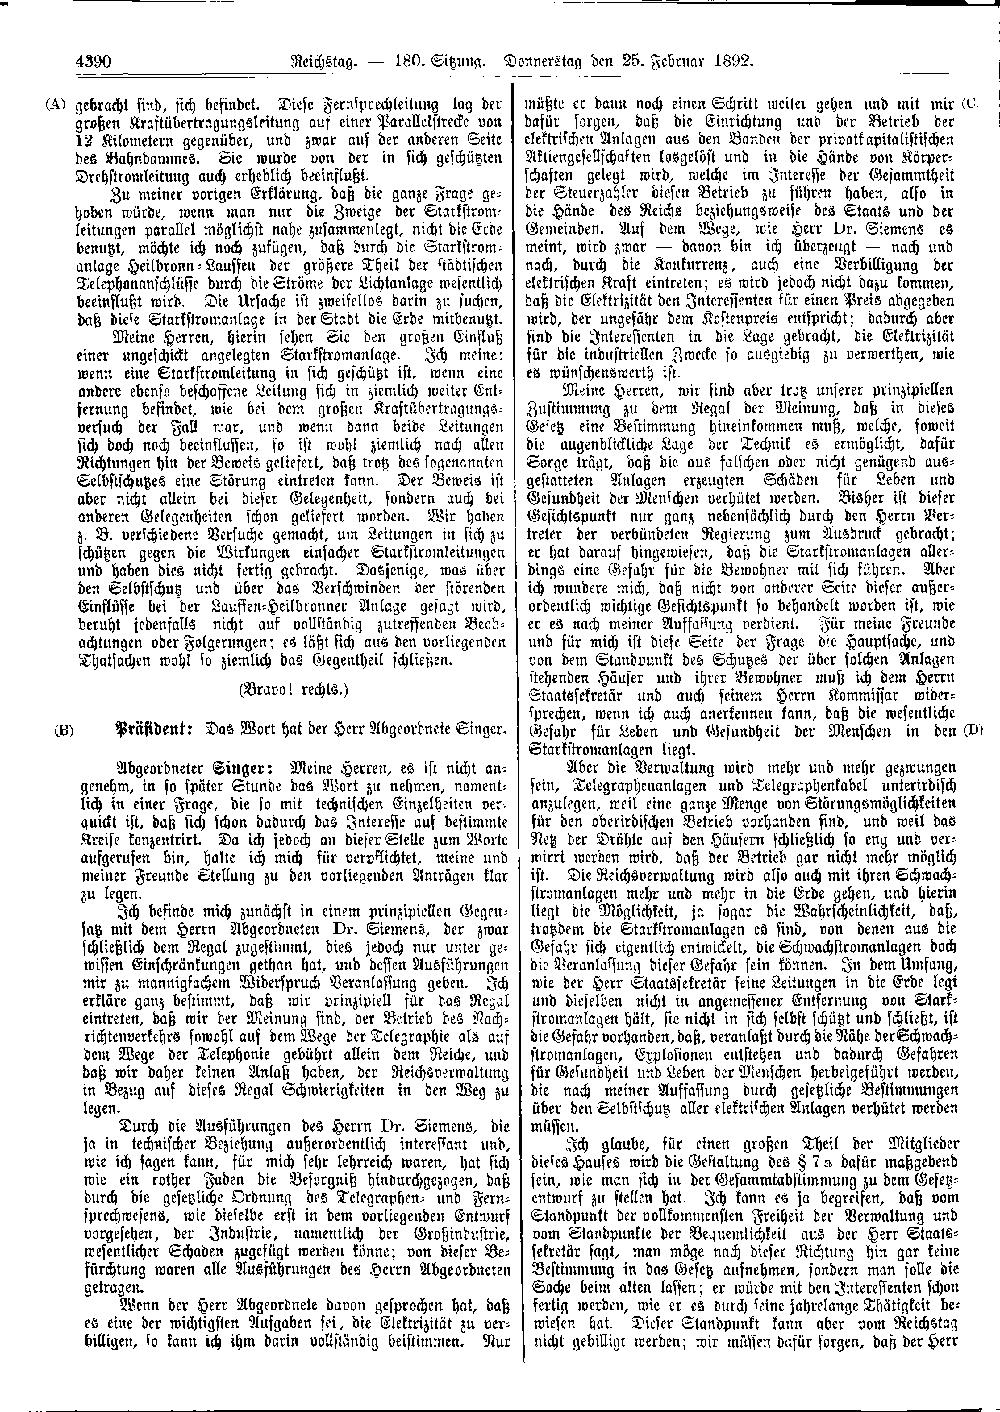 Scan of page 4390